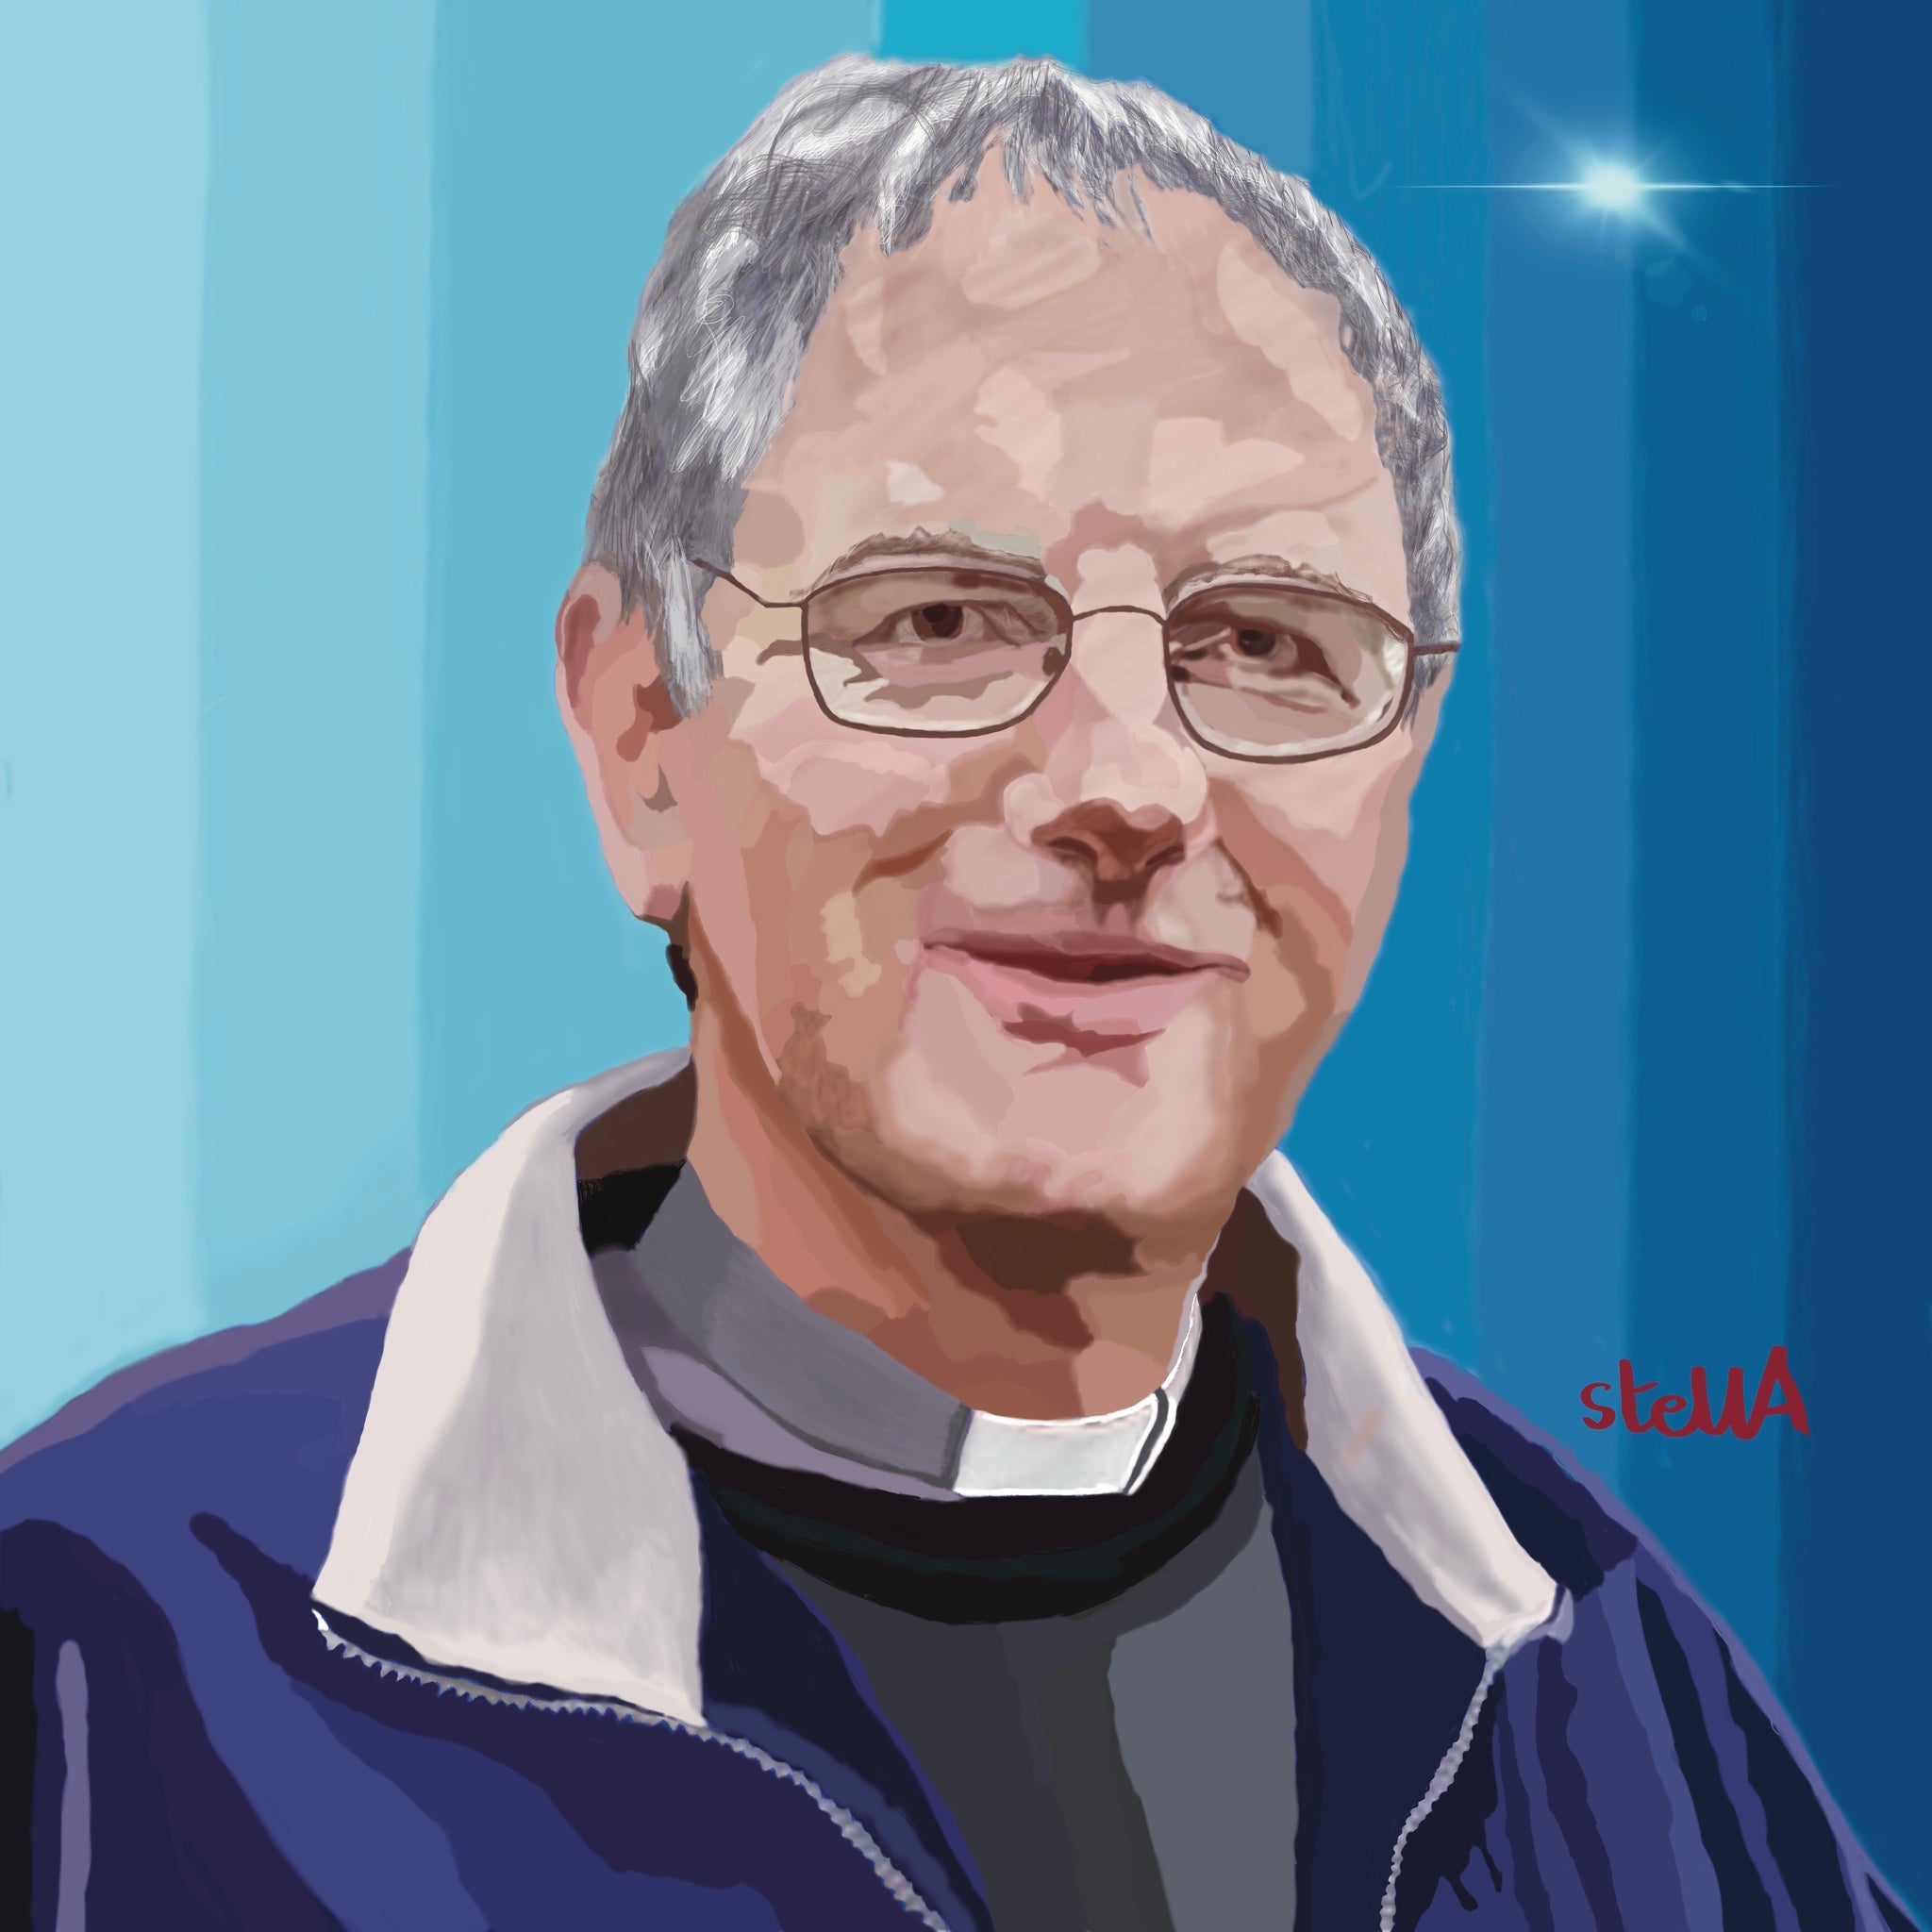 Commission of digital painting of Keith former vicar of St Milburga church Beckbury by Stella Tooth